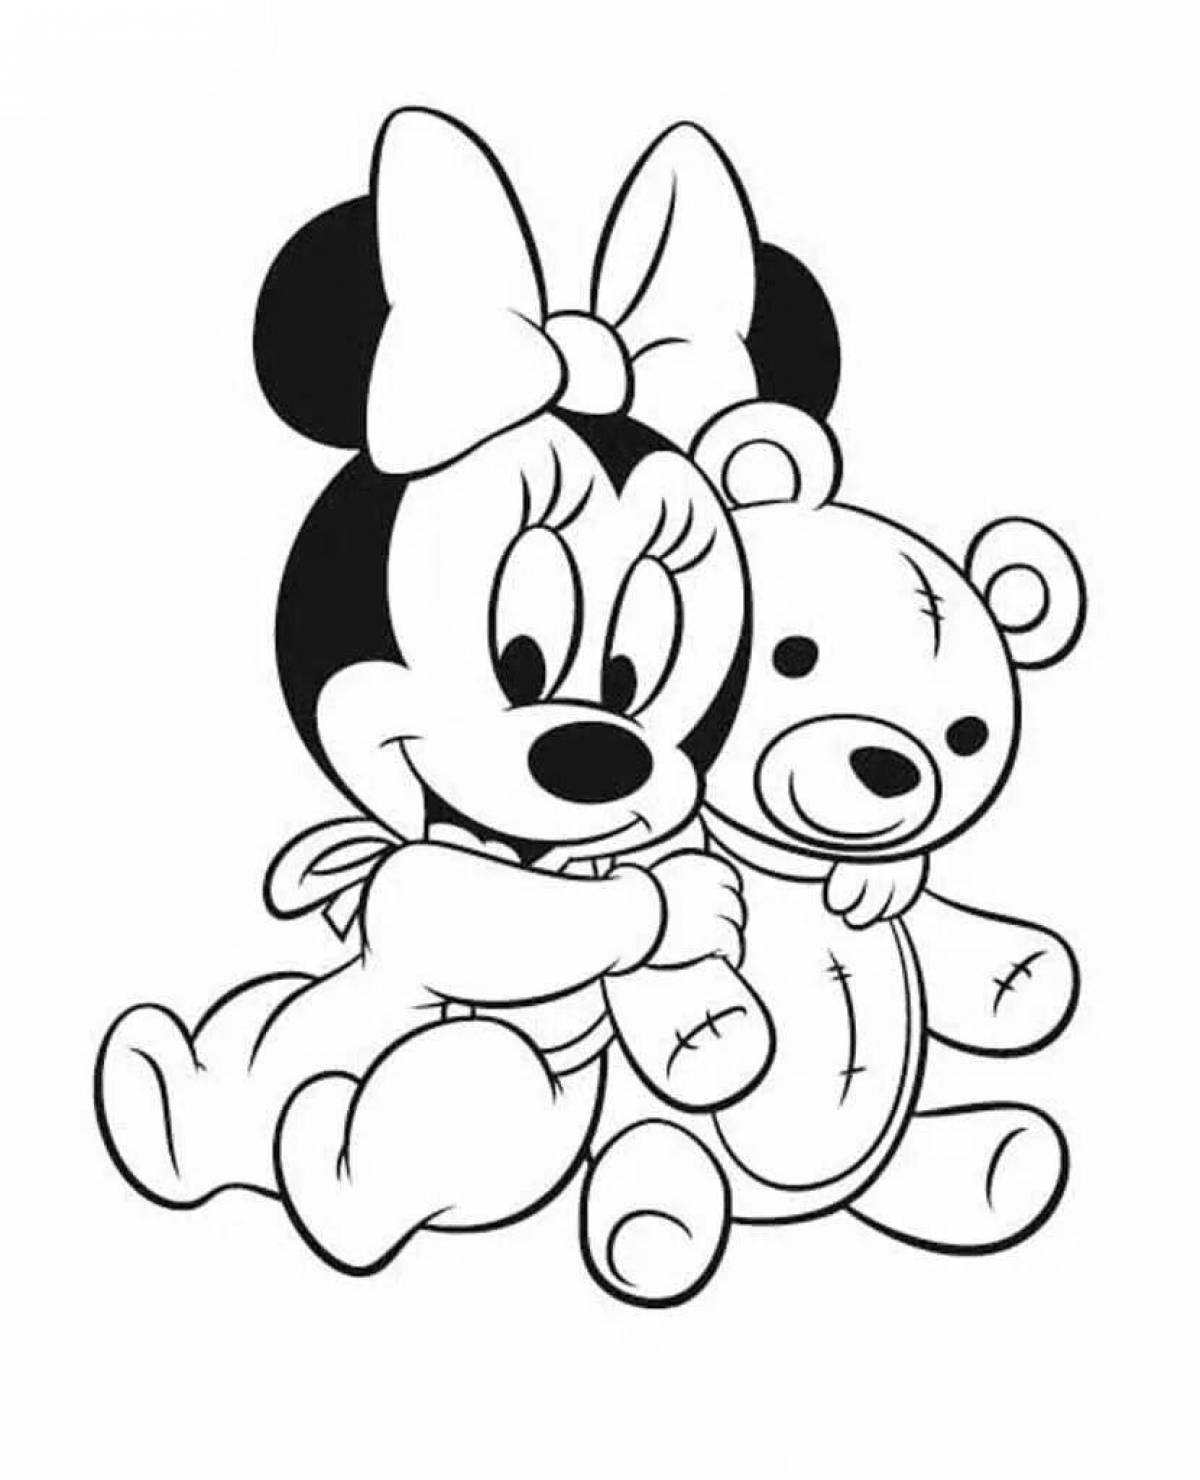 Mickey Mouse and Minnie Mouse #1